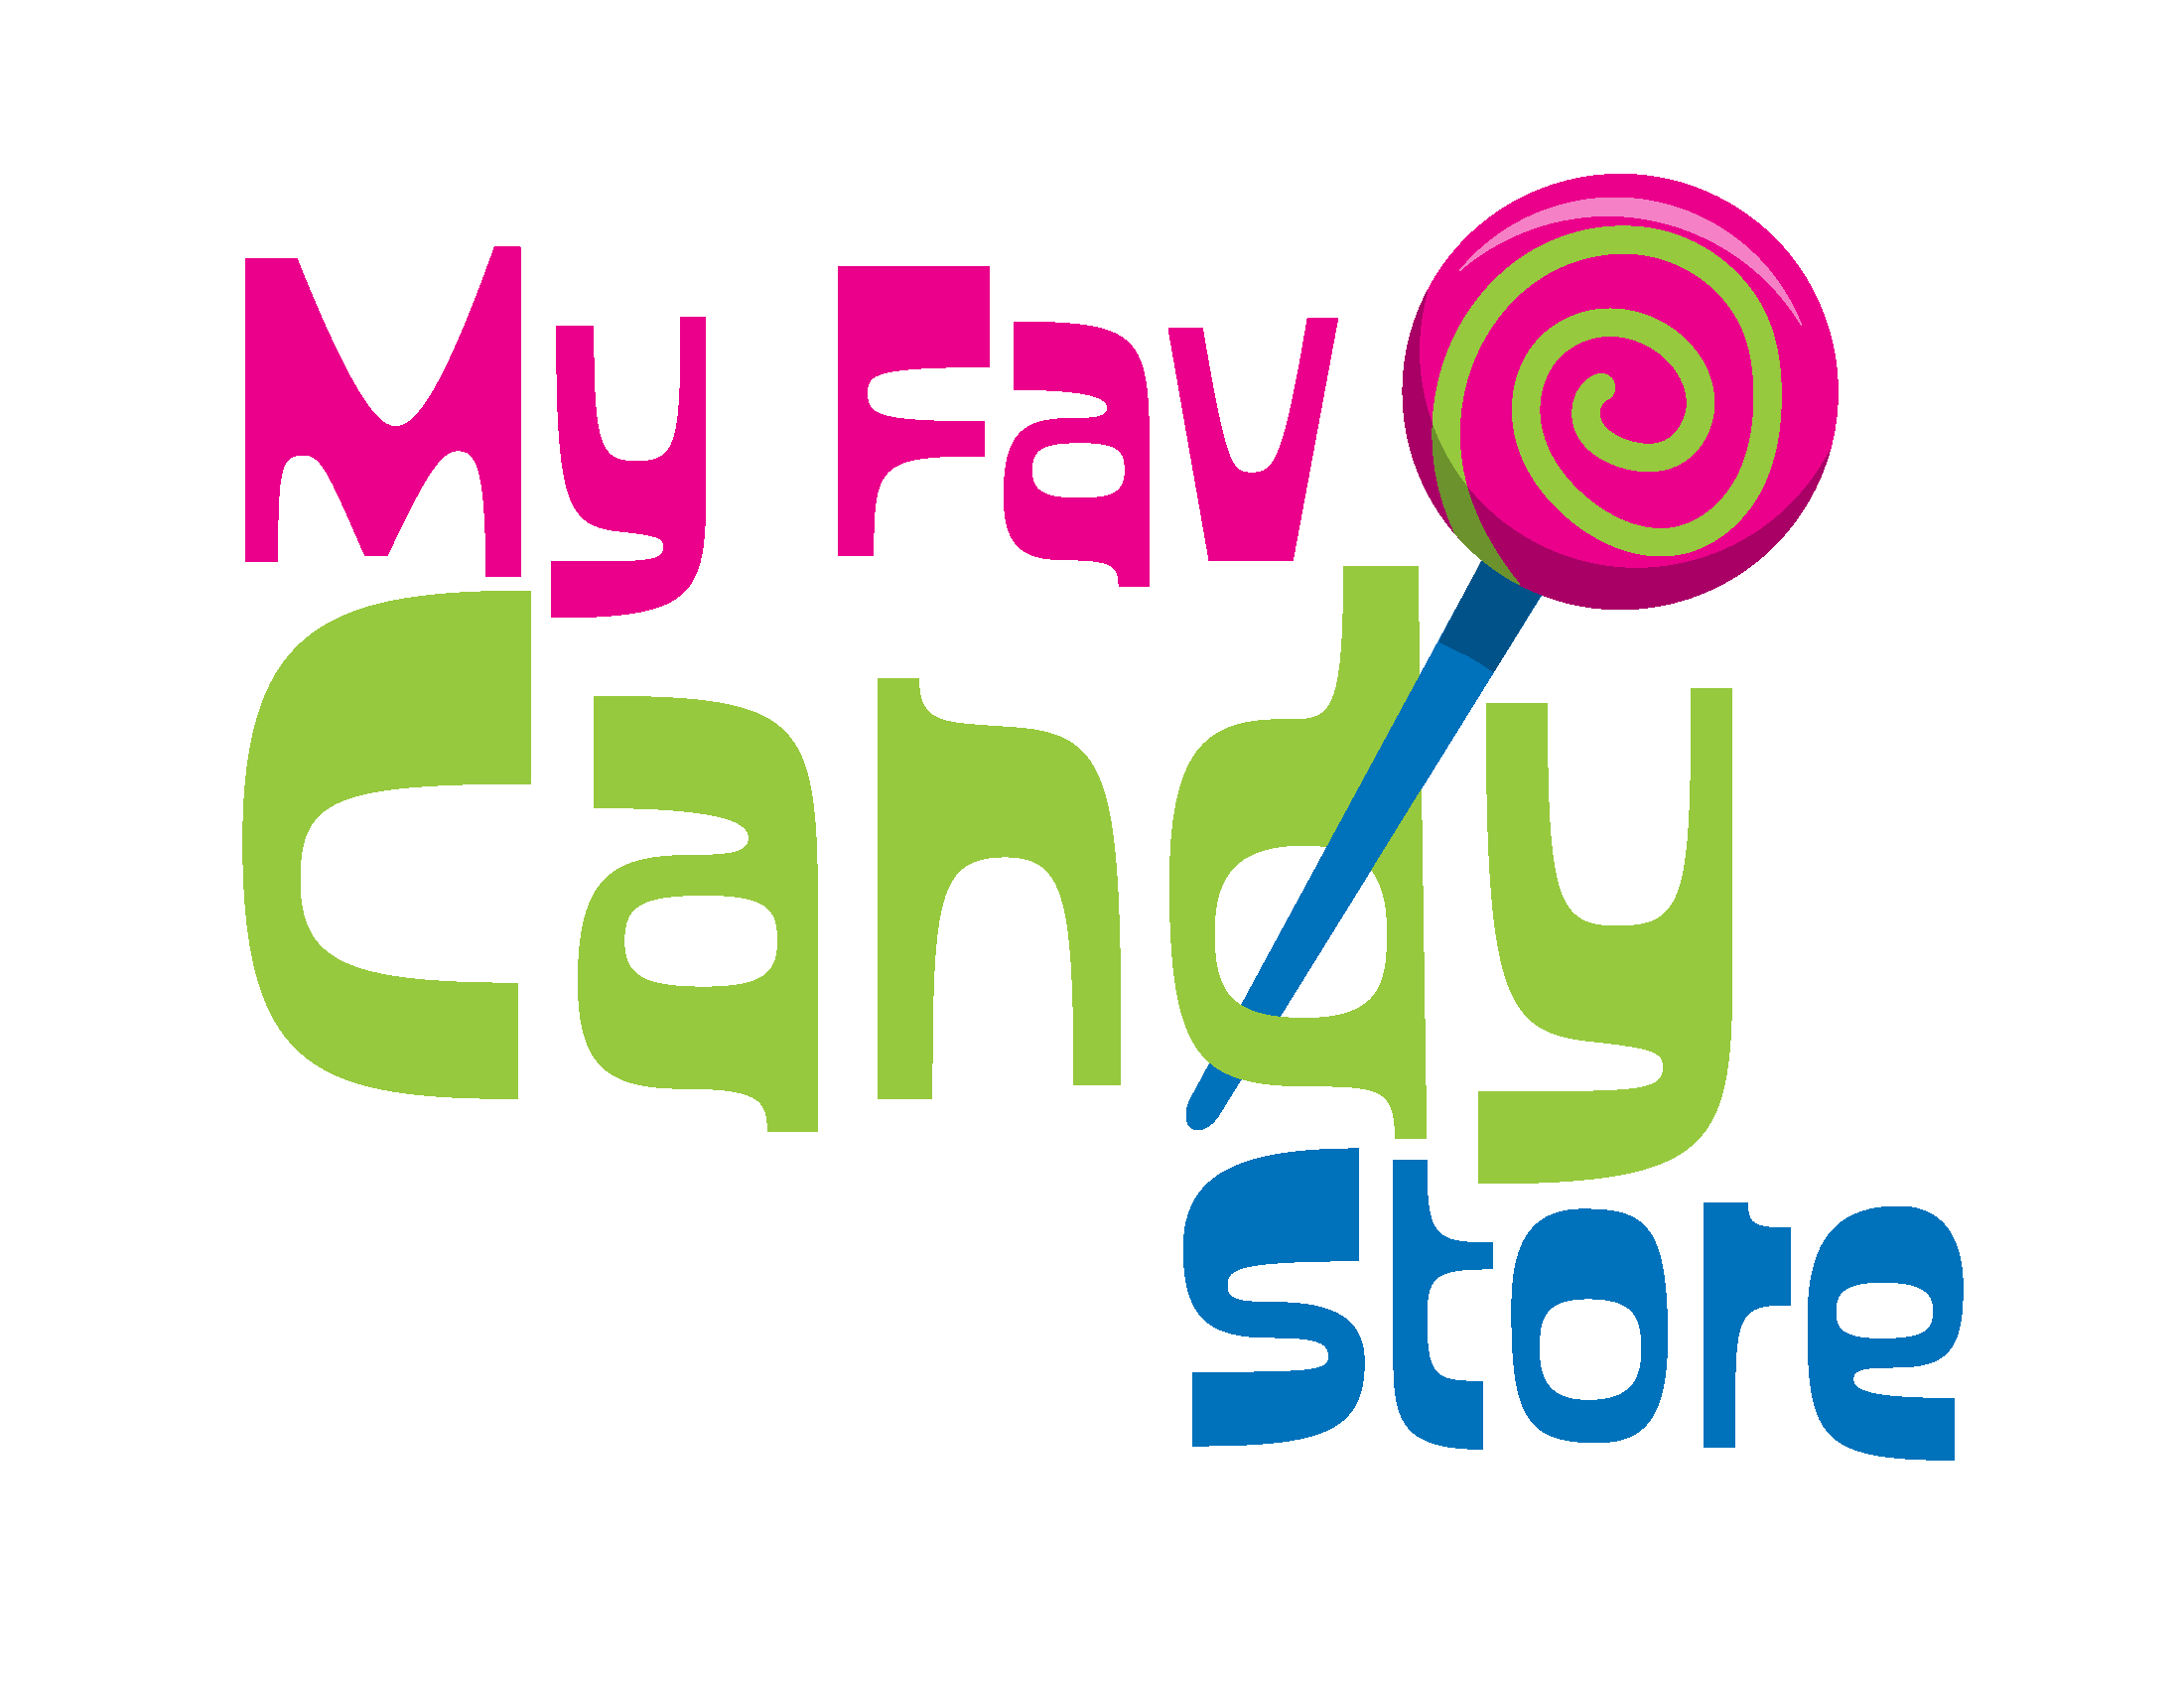 My Fav Candy Store